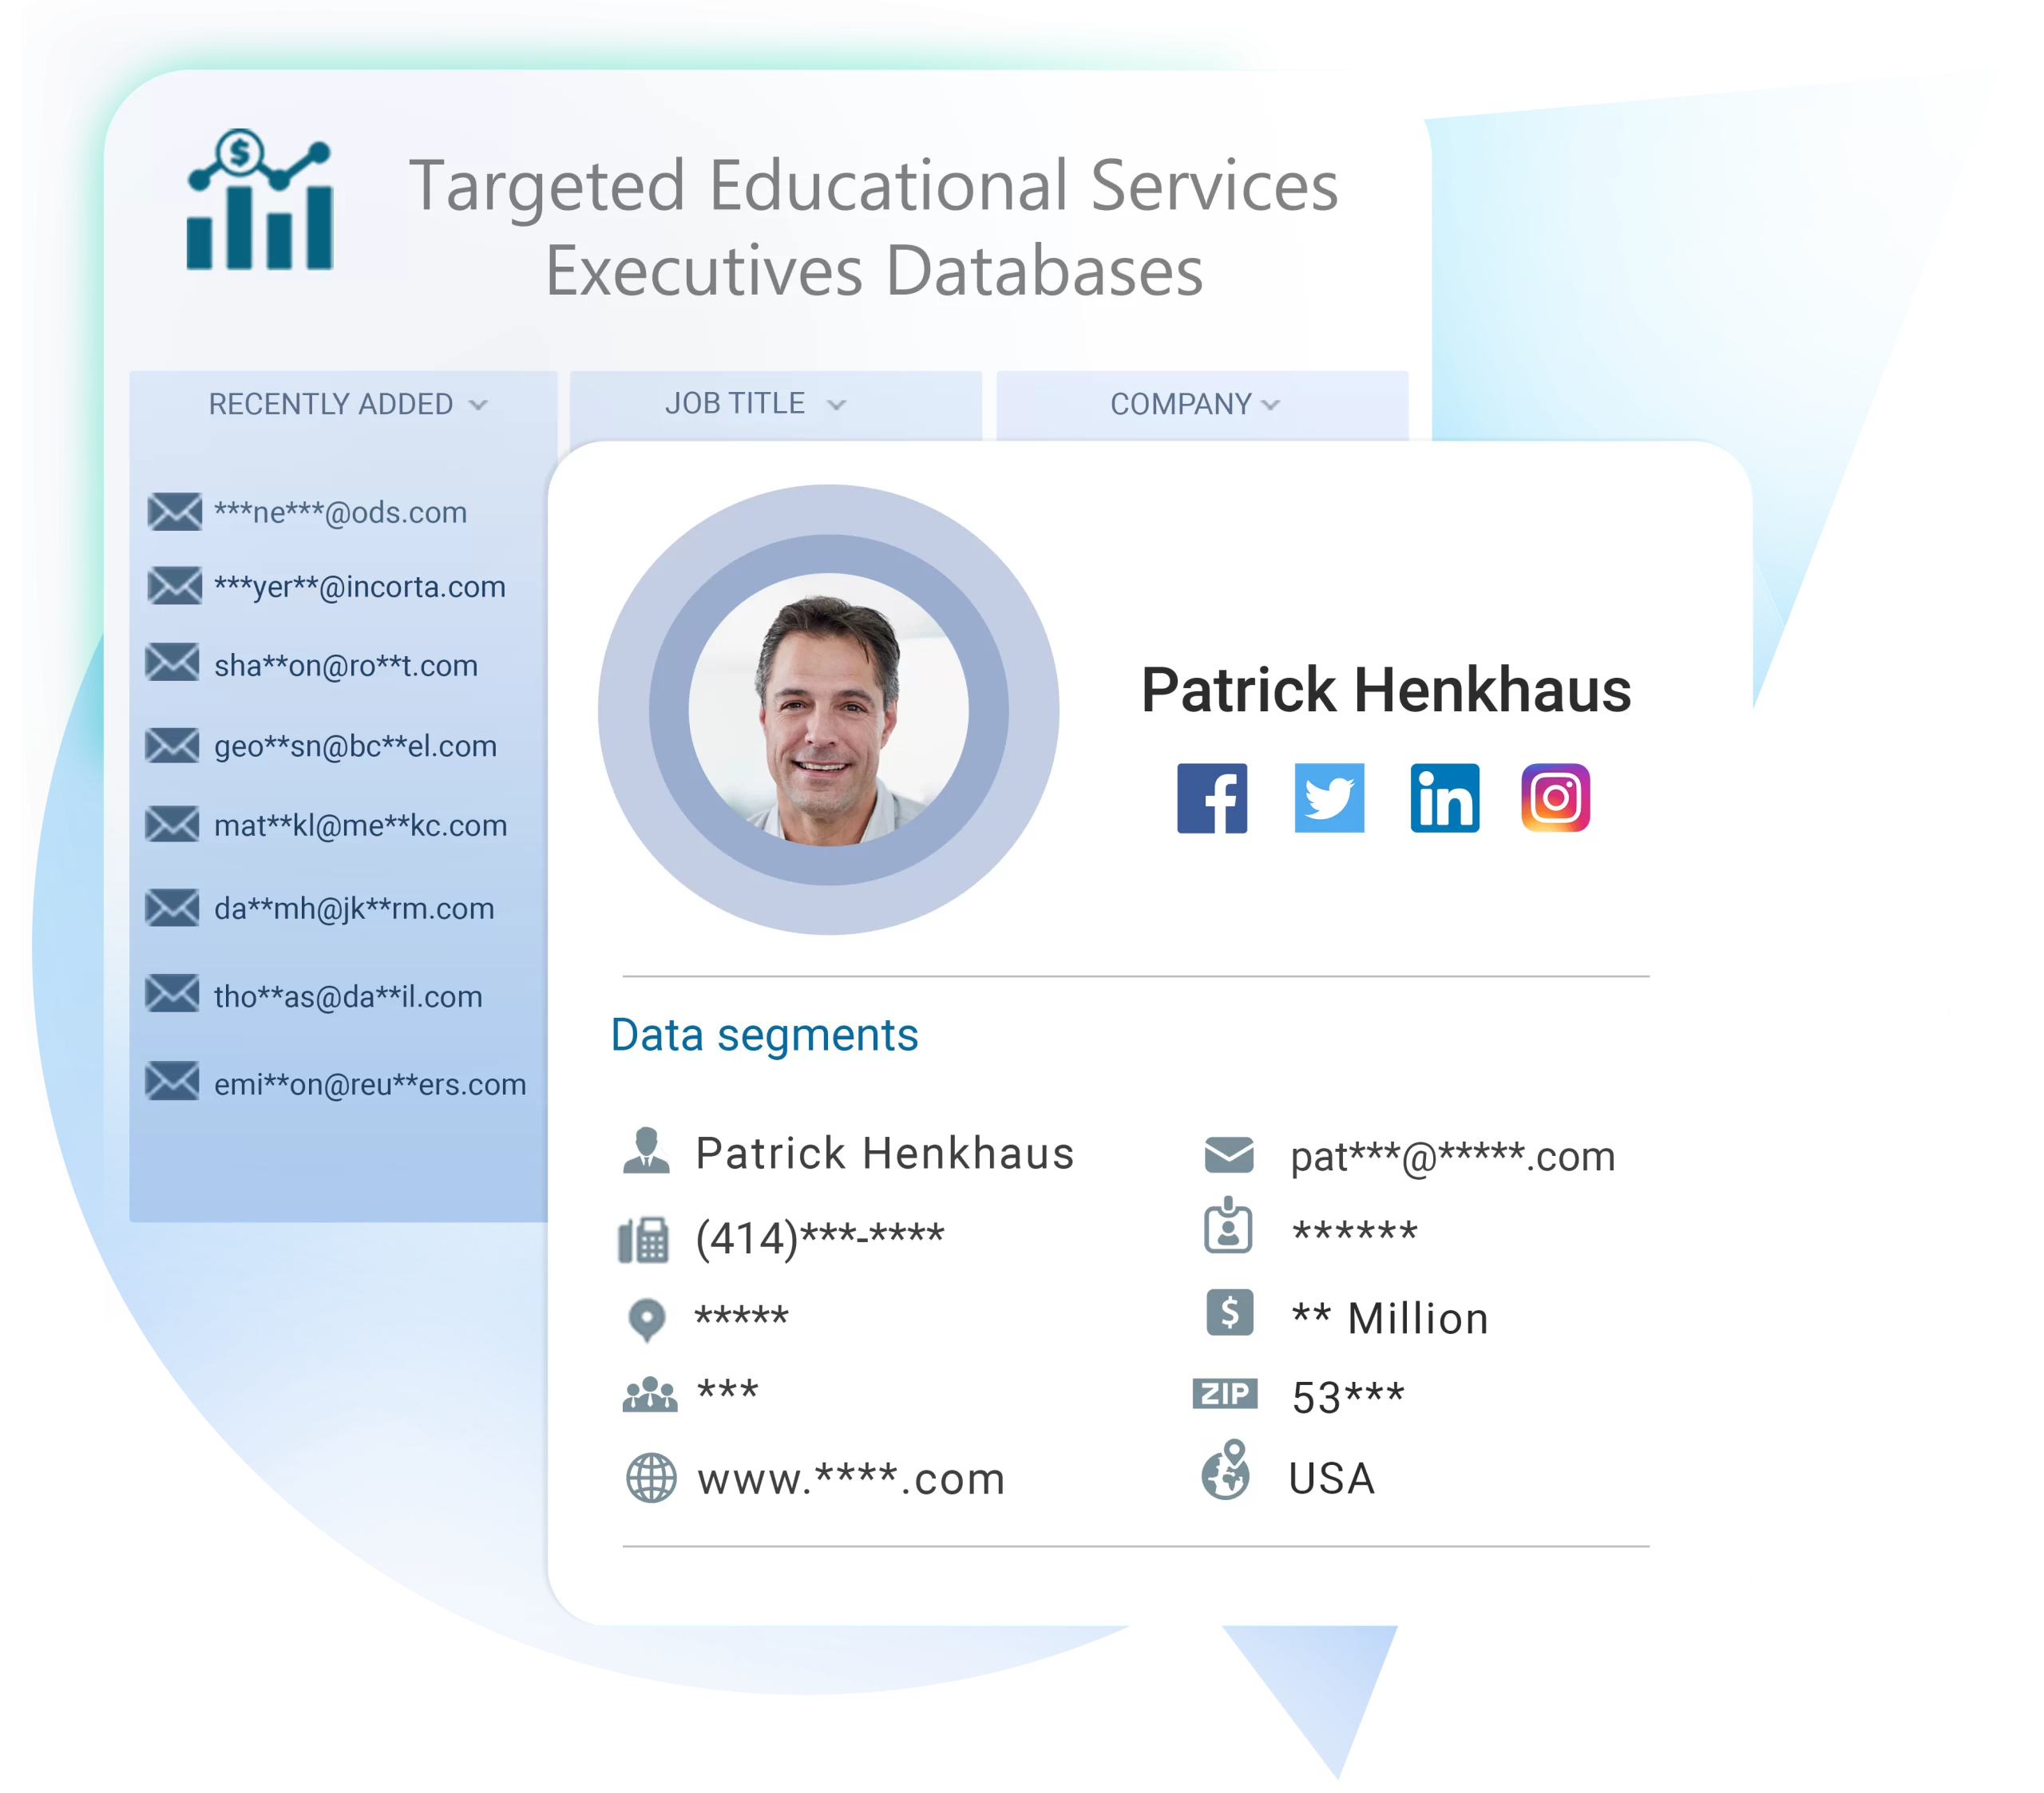 Educational Services Executives Databases